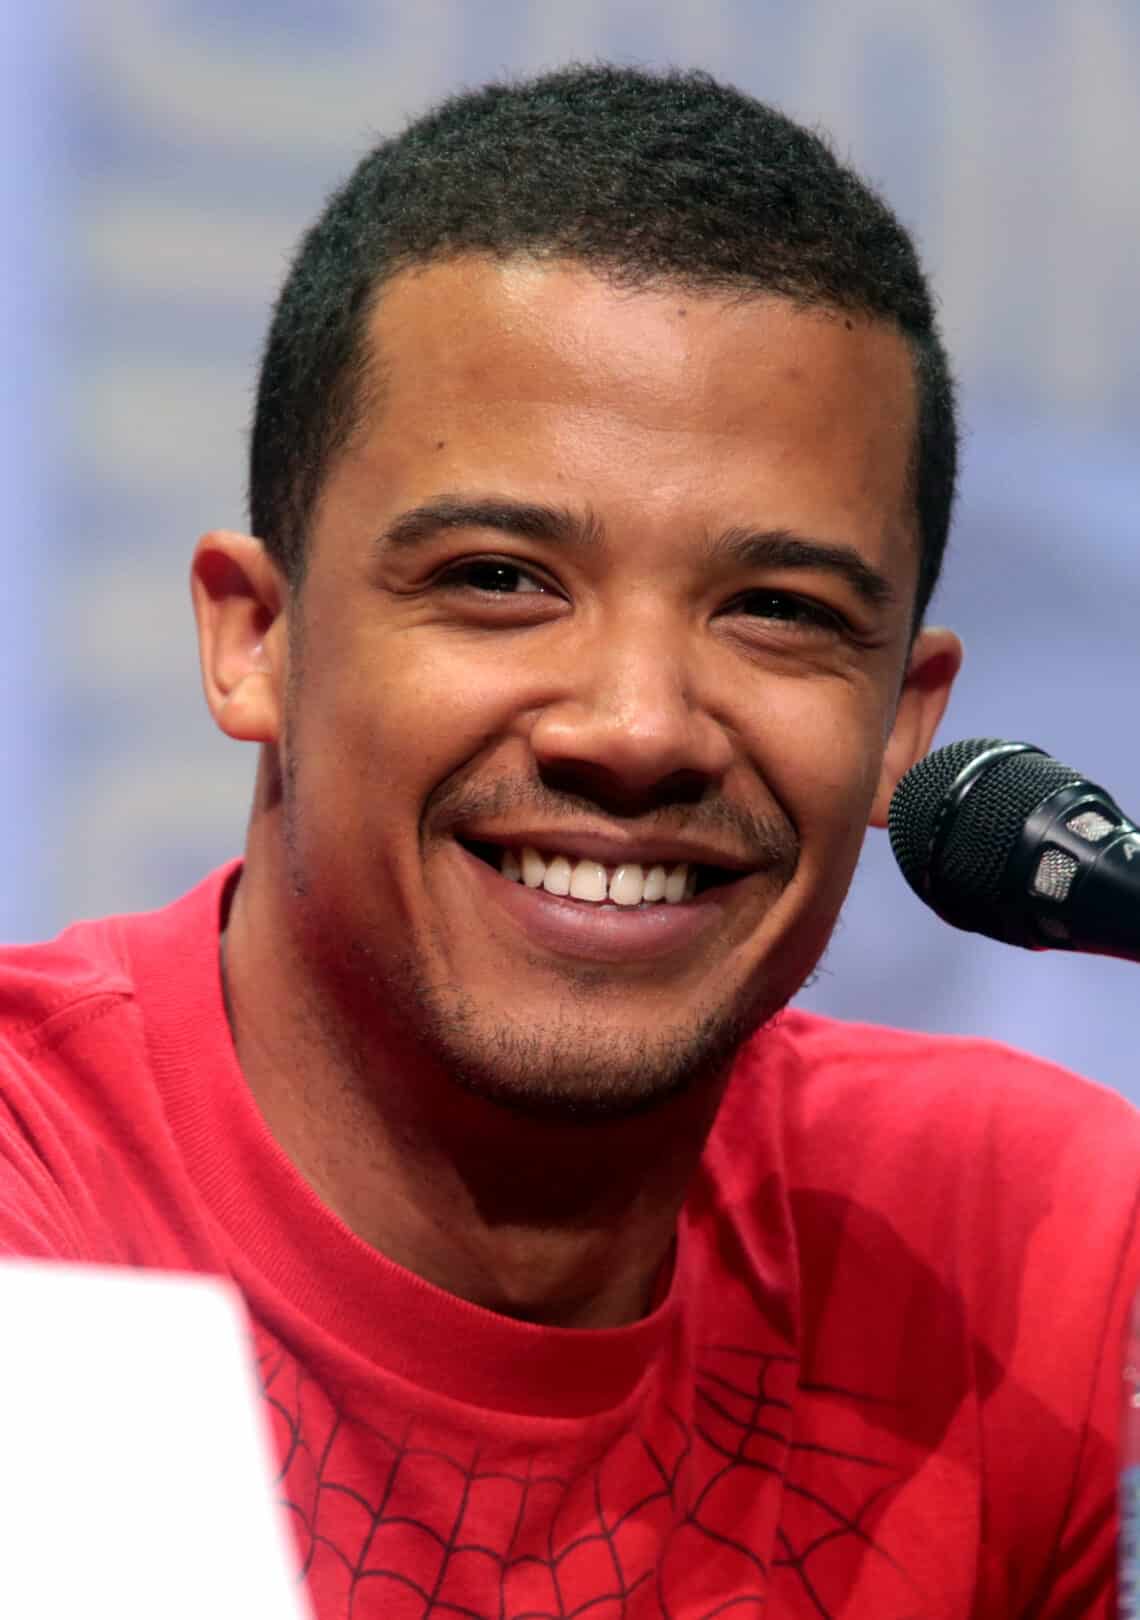 Jacob Anderson By Gage Skidmore 5023493 1140x1620